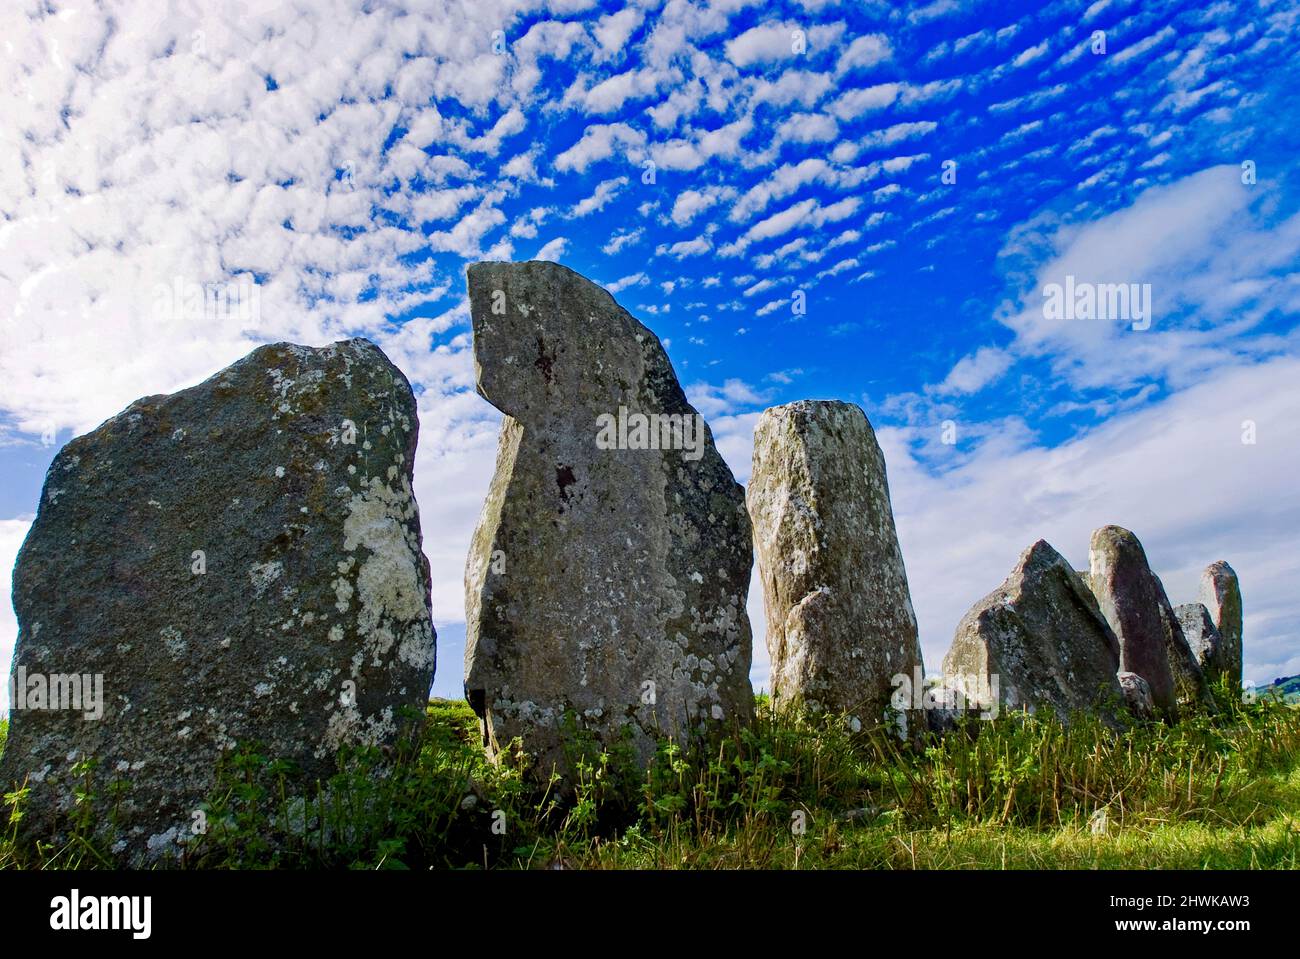 Beltany Stone Circle, Raphoe, County Donegal, Irland Stockfoto